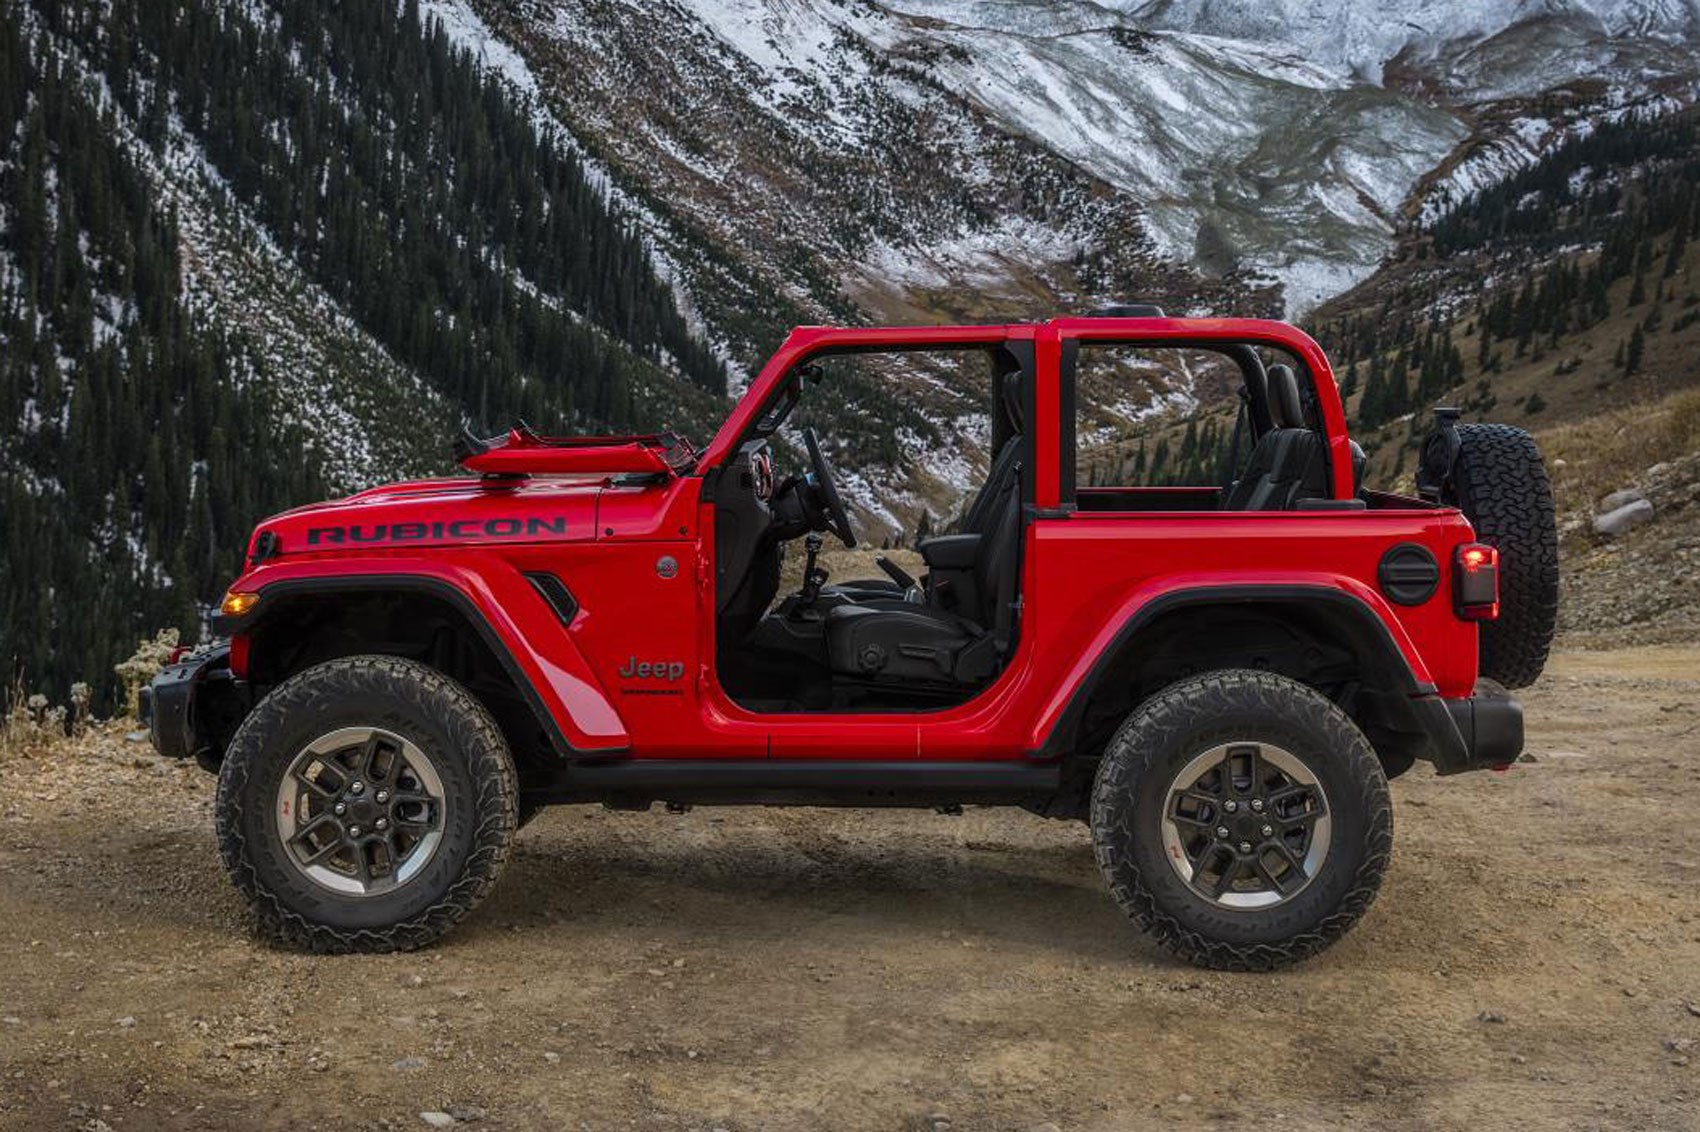 New Jeep Wrangler: the go-anywhere SUV reborn for 2018 arrives in Europe |  CAR Magazine